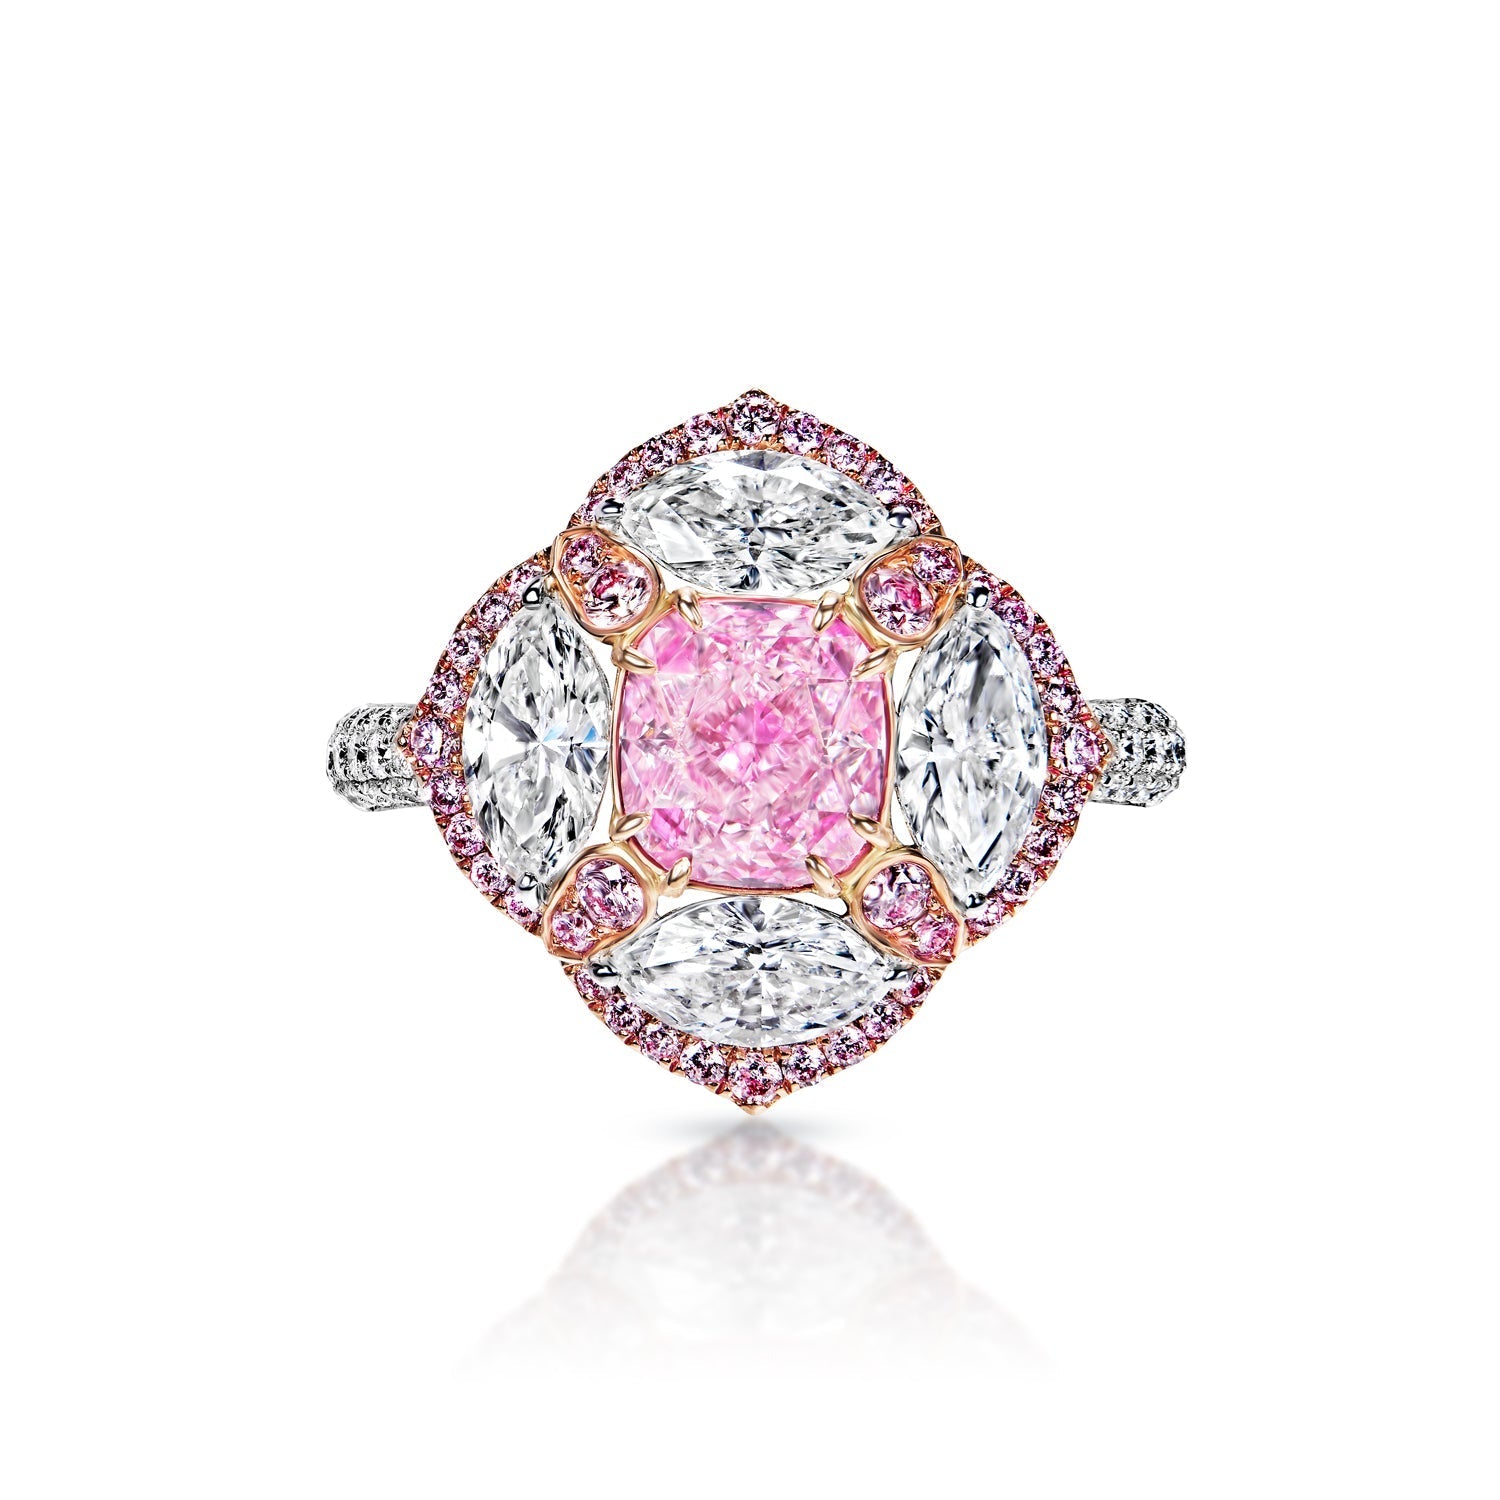 Virginia 3 Carat Very Light Pink Cushion Cut Diamond Engagement Ring in White Gold & Rose Gold Front View